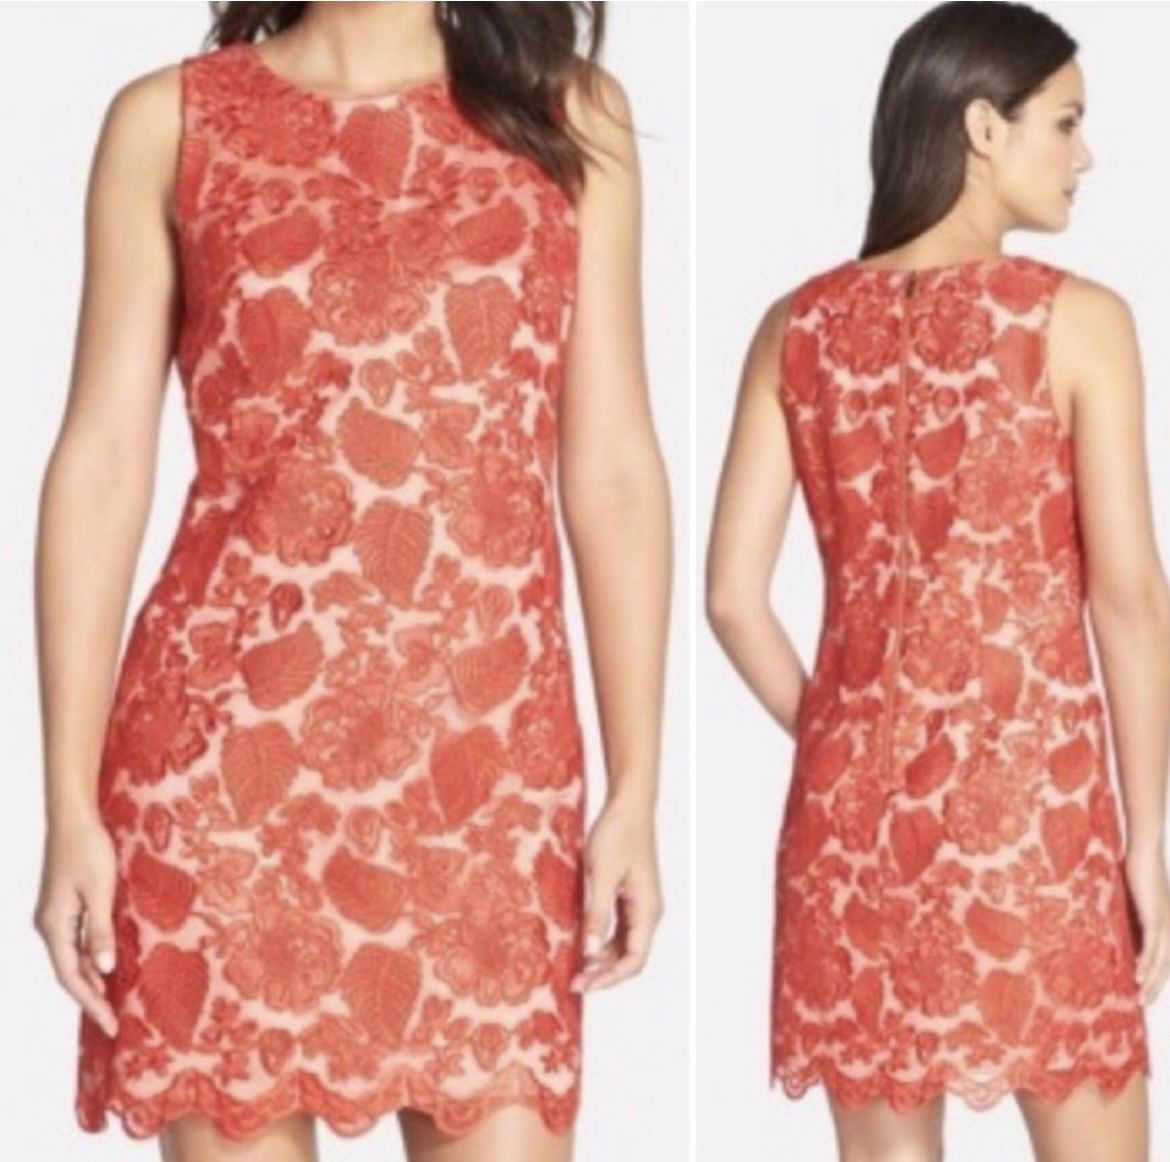 Vince Camuto Red Lace Overlay Dress - Size 8